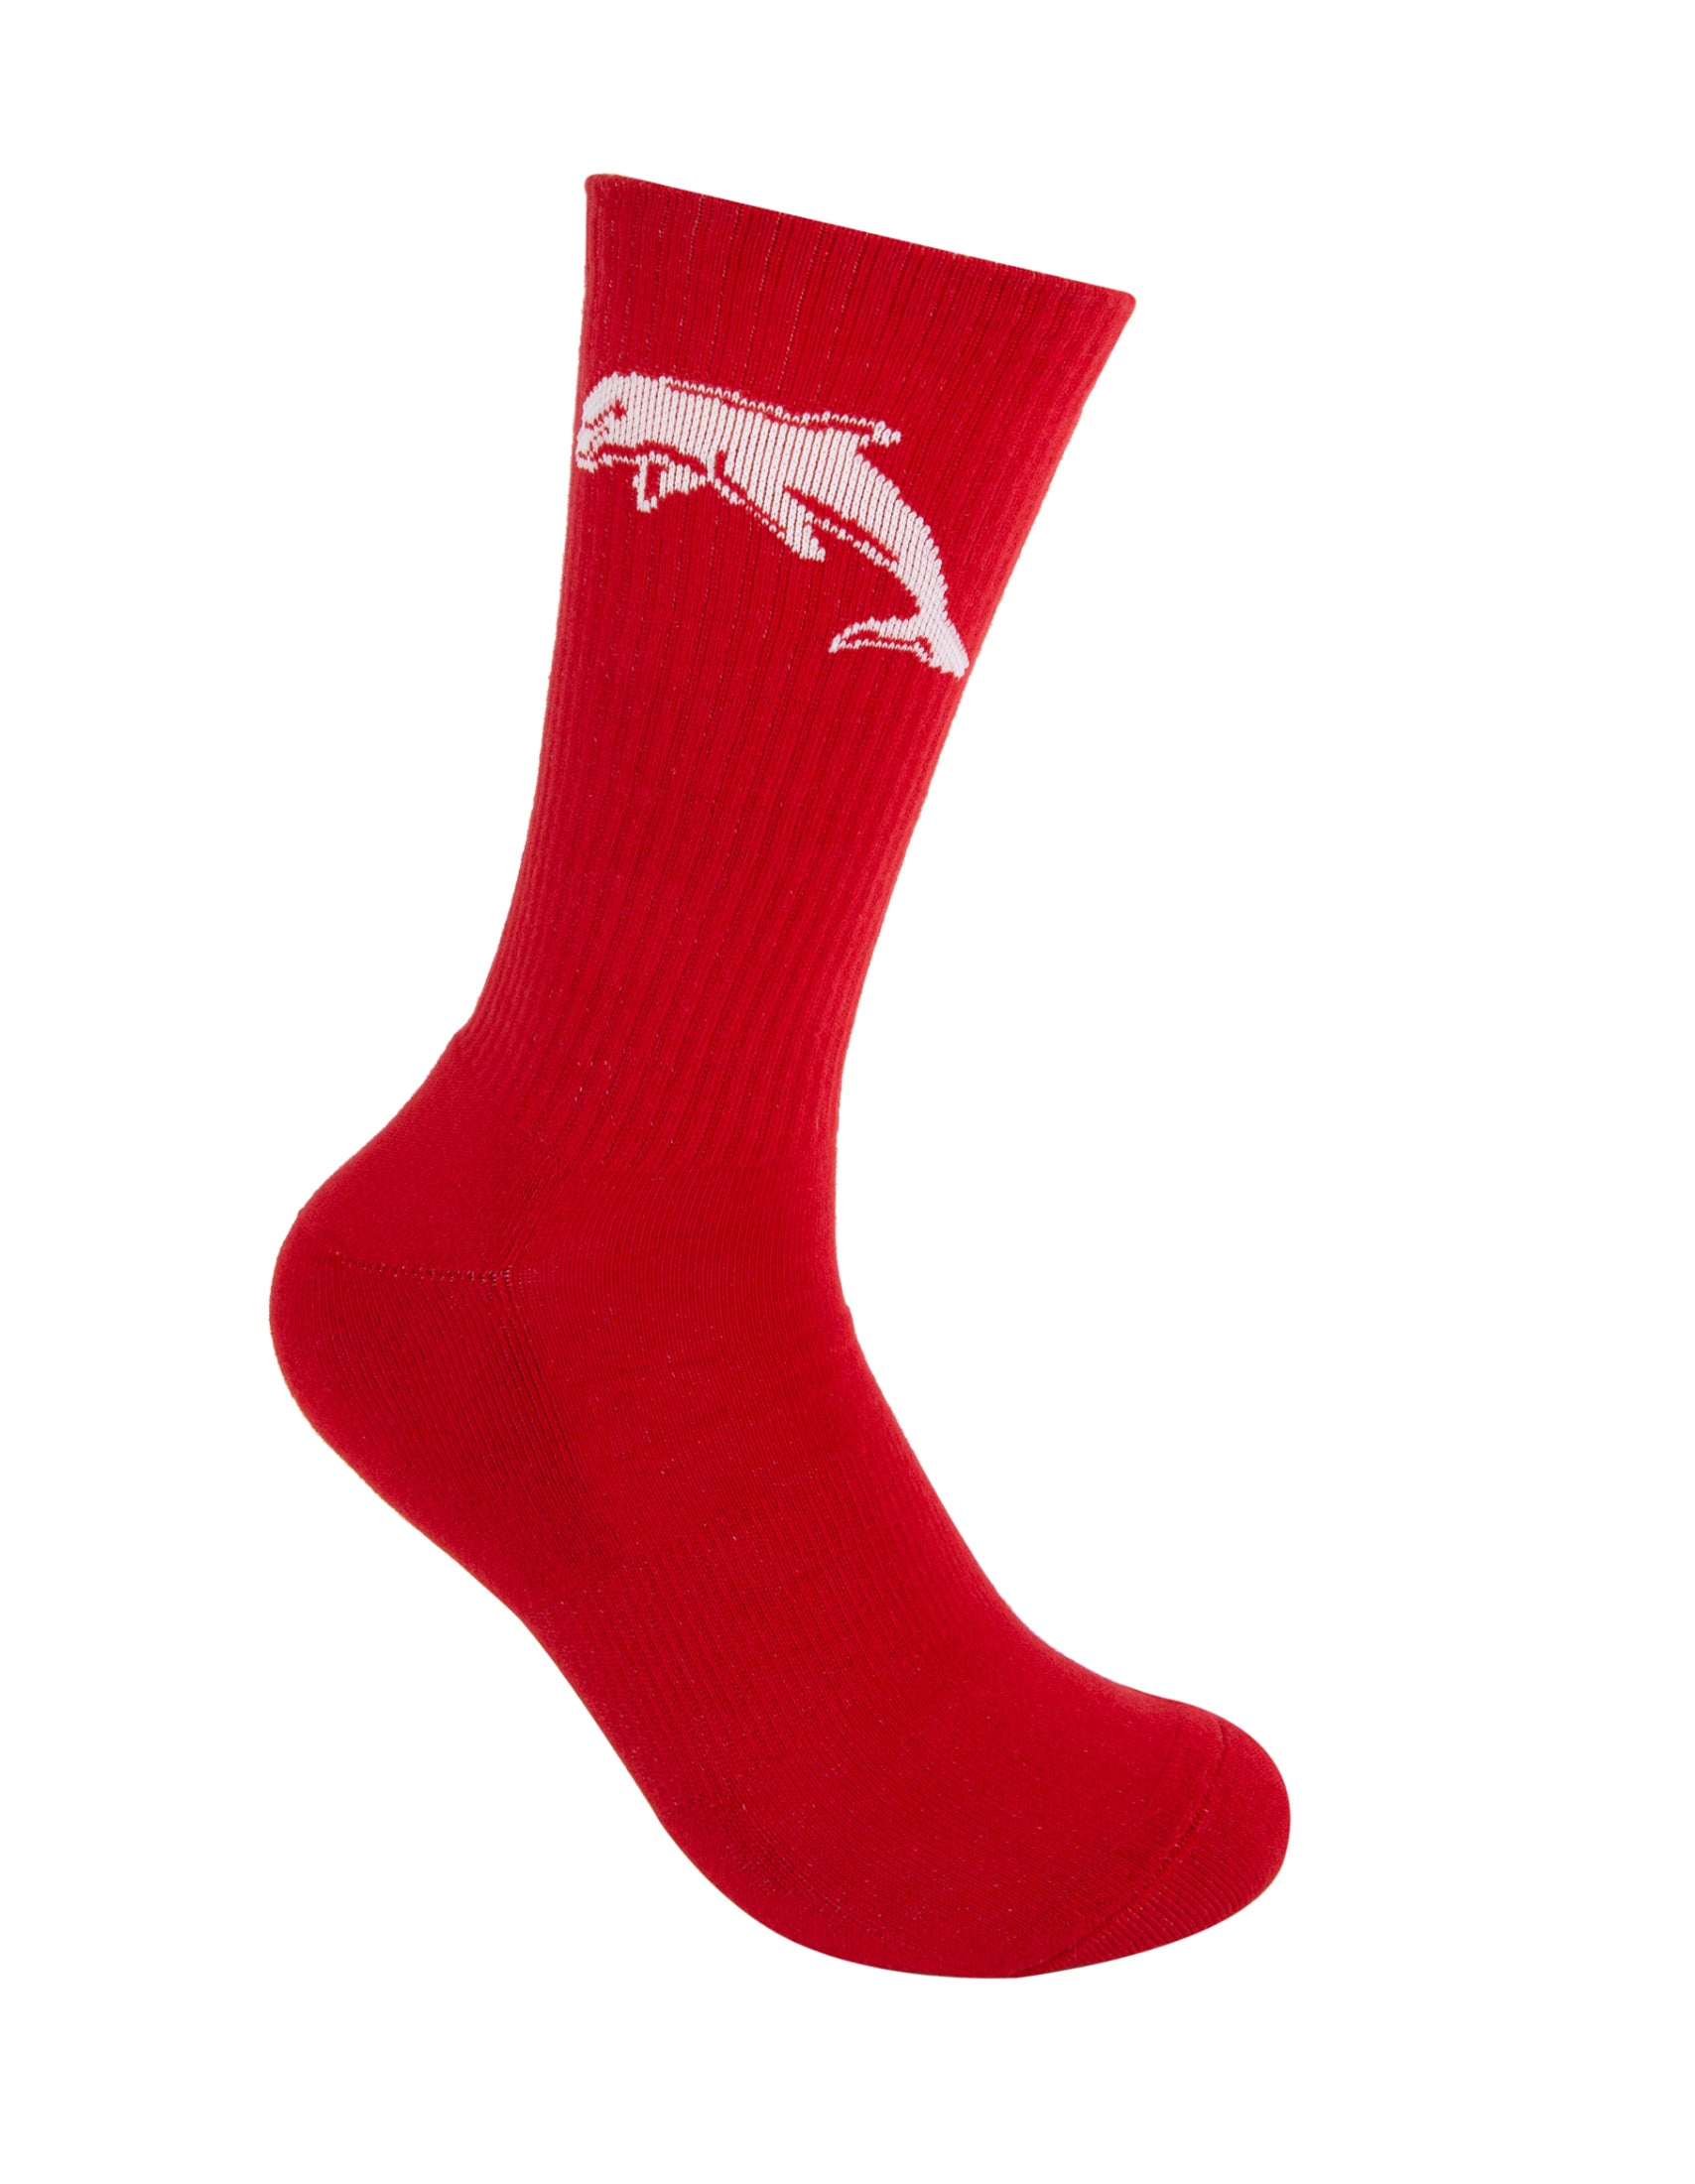 Redcliffe Dolphins Icons Sneaker Socks 2 Pack